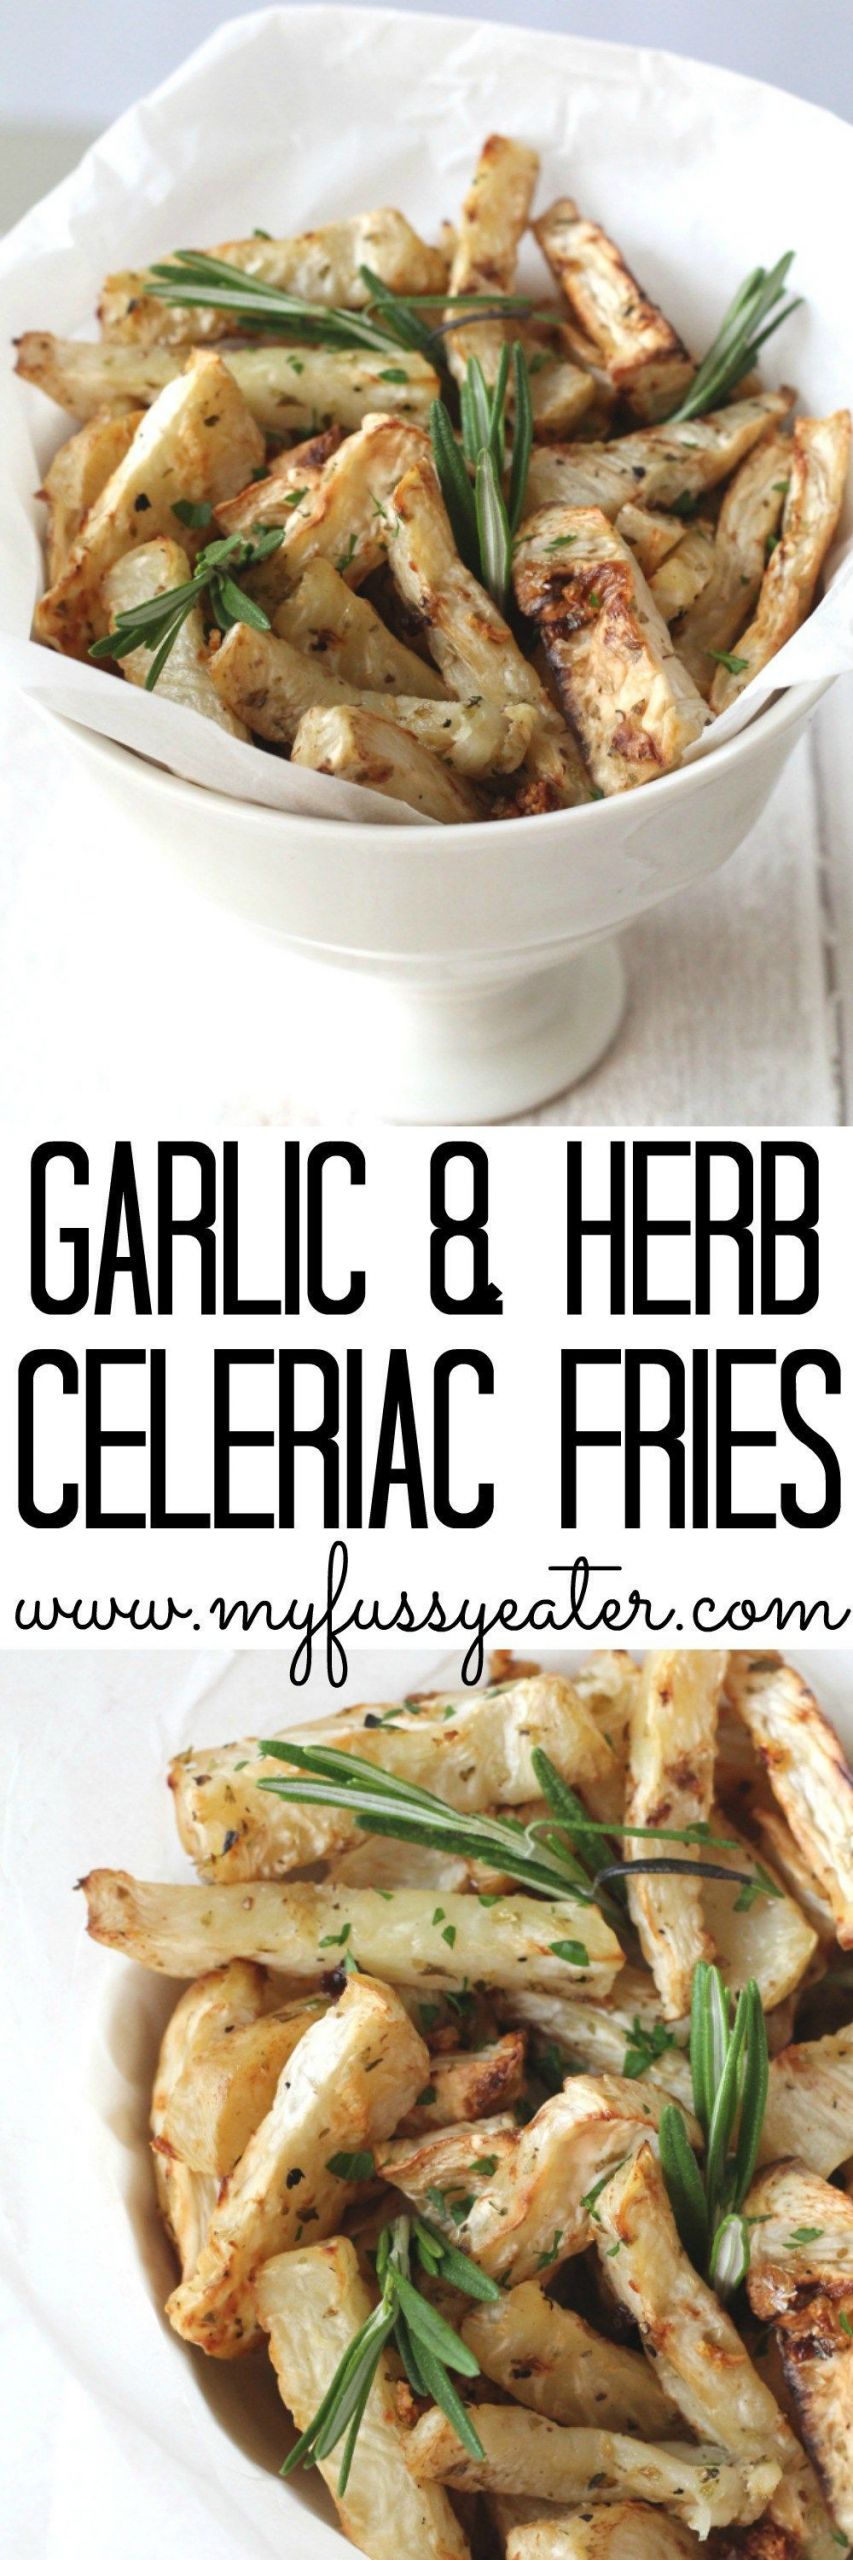 Low Calorie Vegetable Side Dishes
 Celeriac Fries A delicious low carb low calorie and low